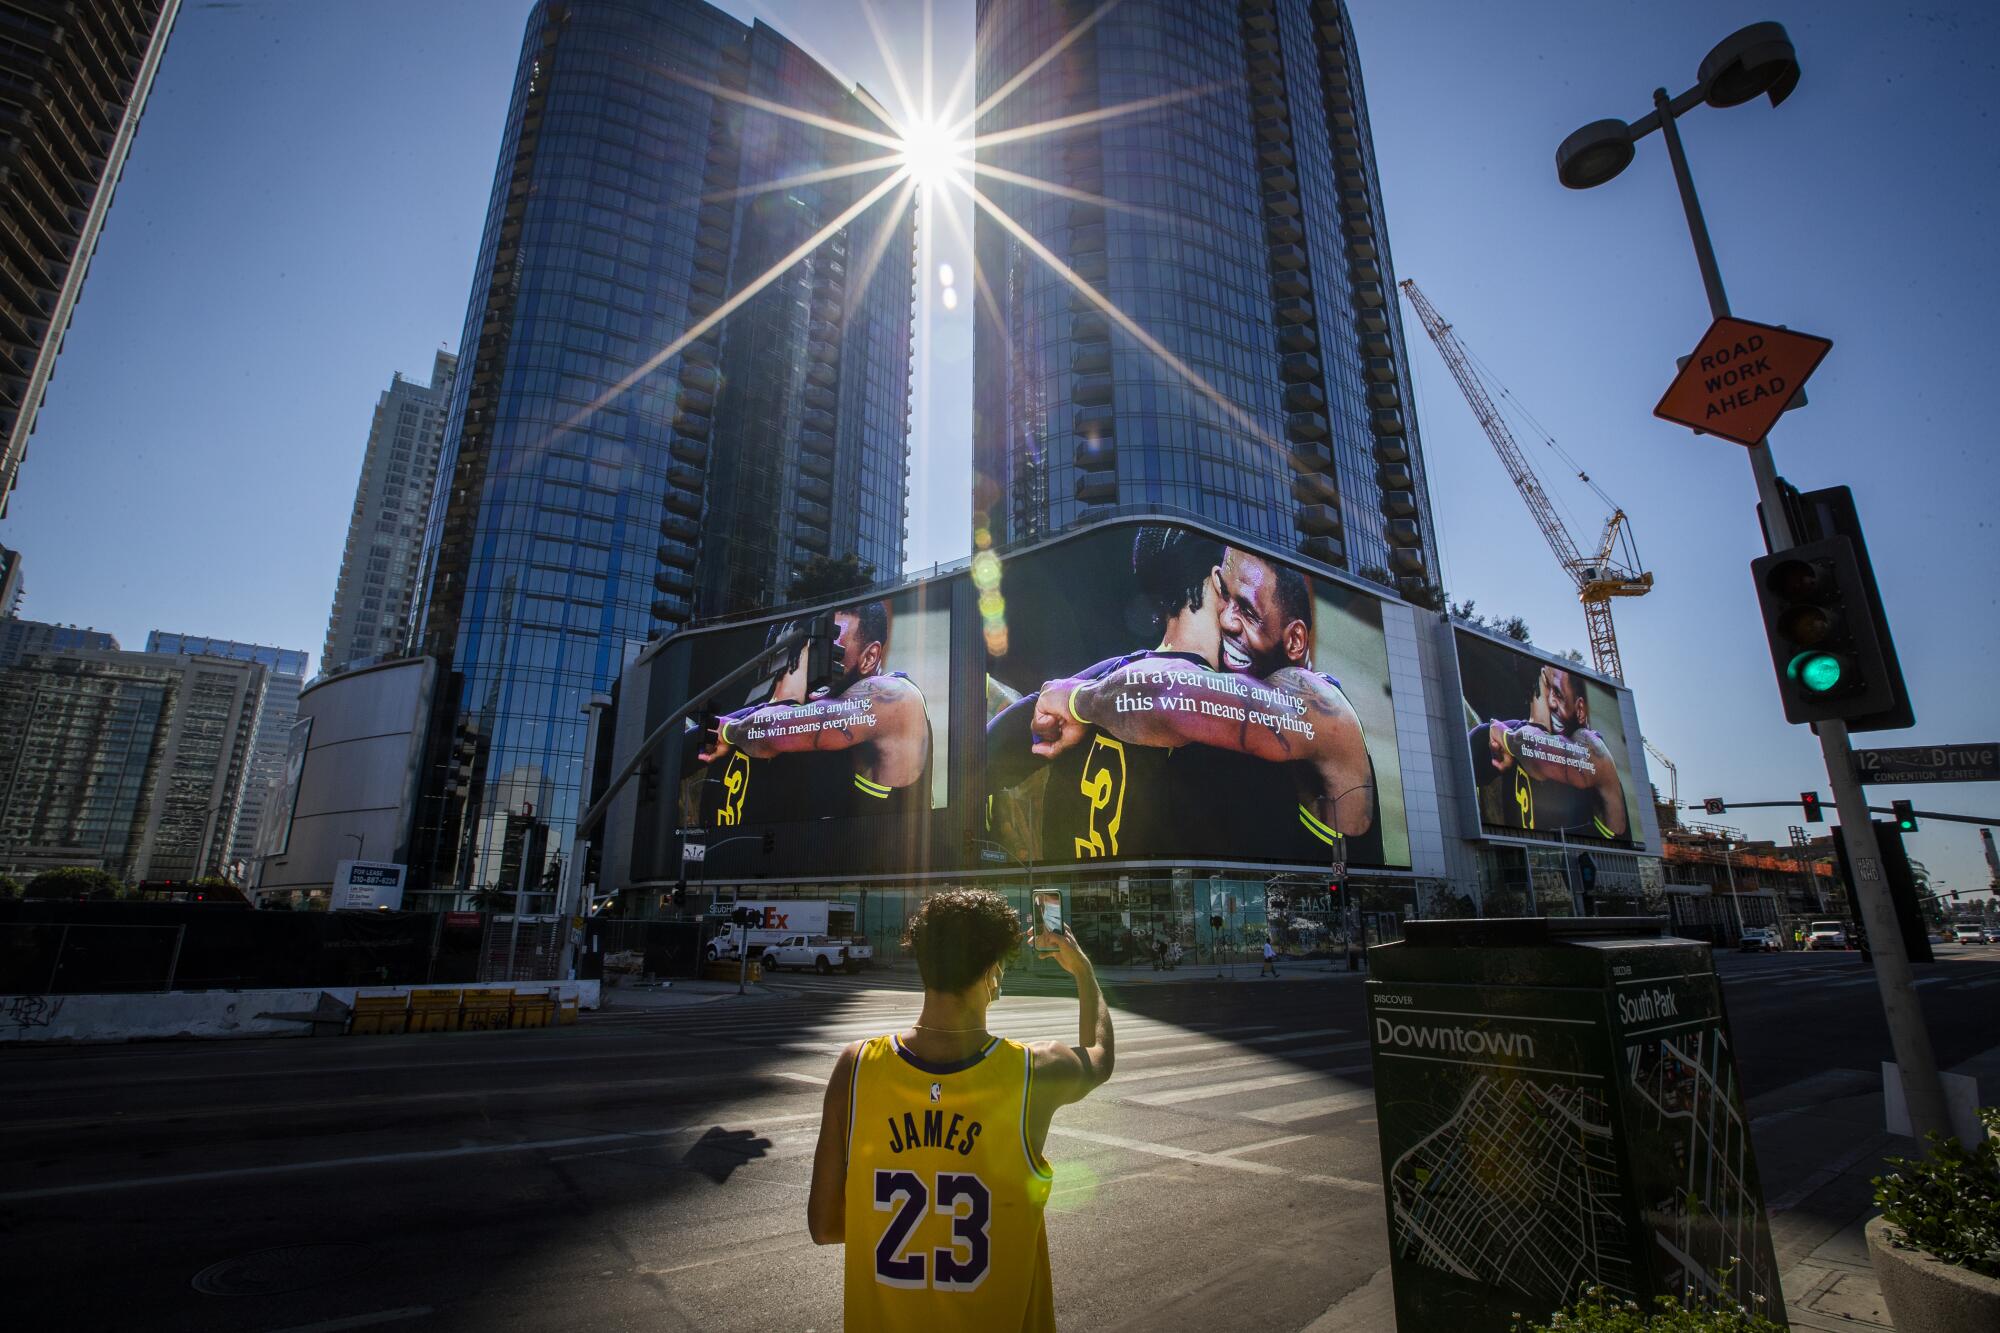 Lakers fan Michael Vasquez, of Buena Park, takes video of giant screens across from the Staples Center.